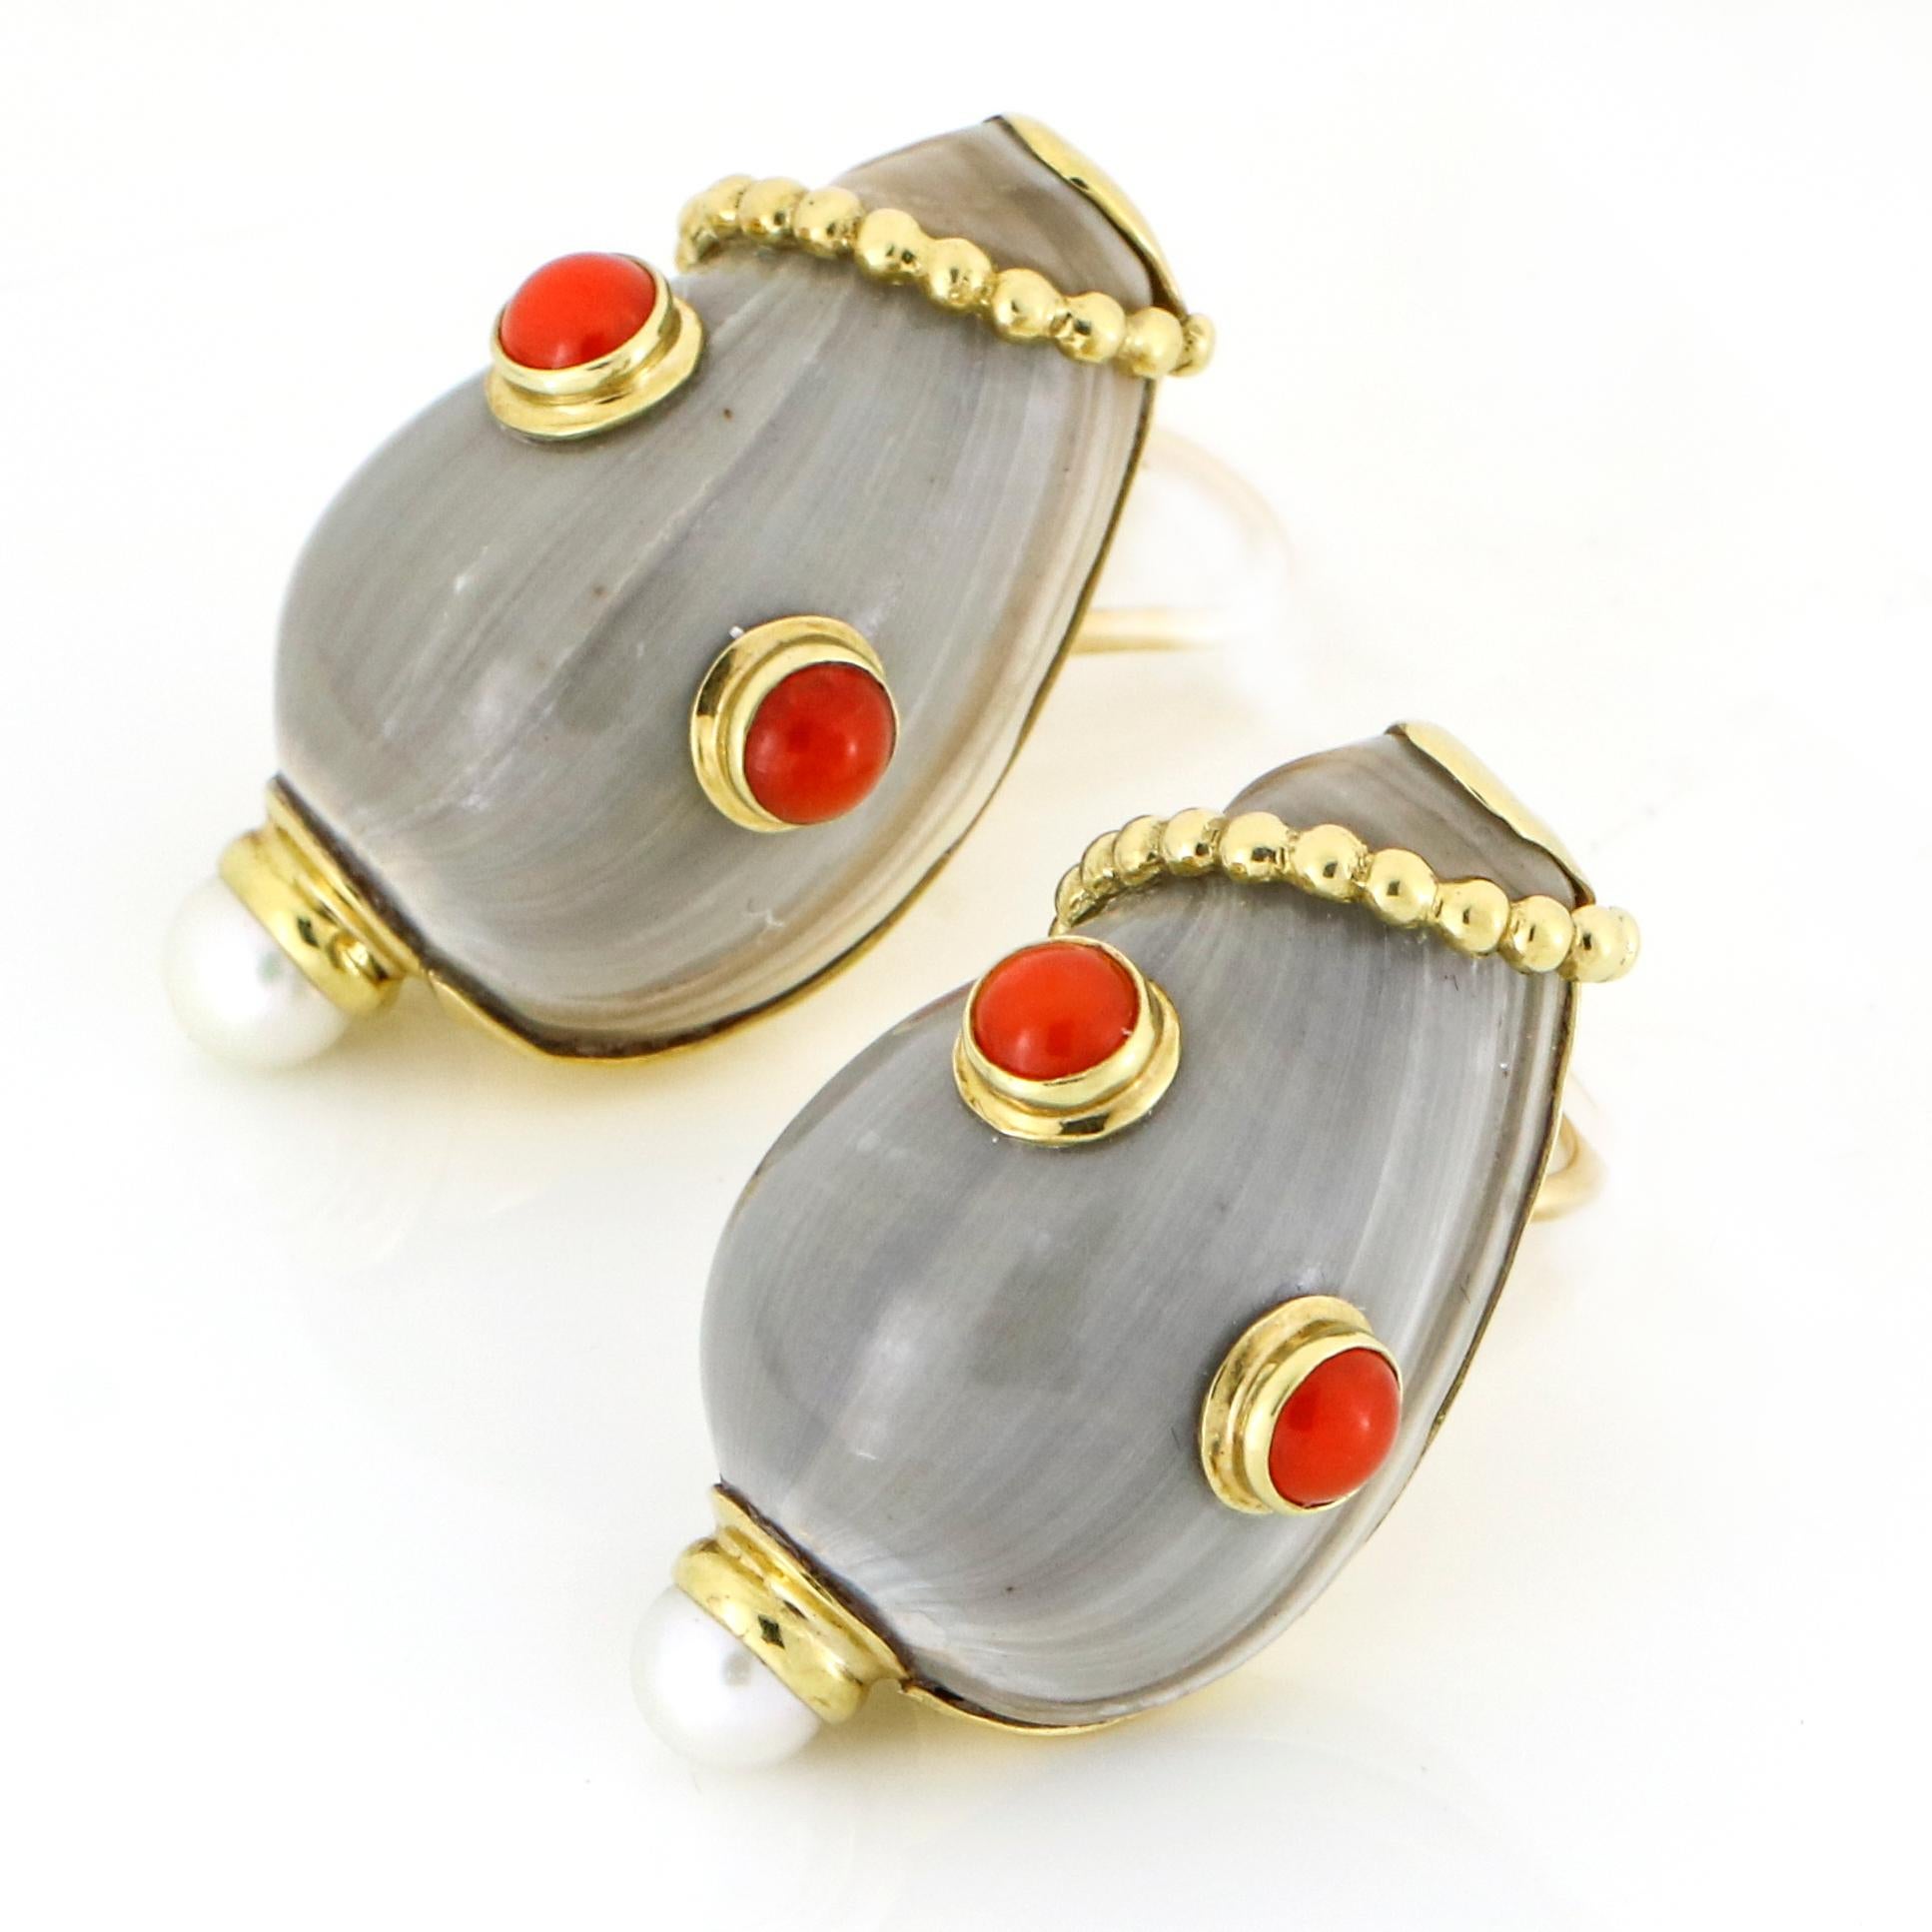 Mazza Bartholomew Grey Sea Shell Coral Pearl Clip-On Earrings in 18 Karat Gold In Excellent Condition For Sale In Fort Lauderdale, FL